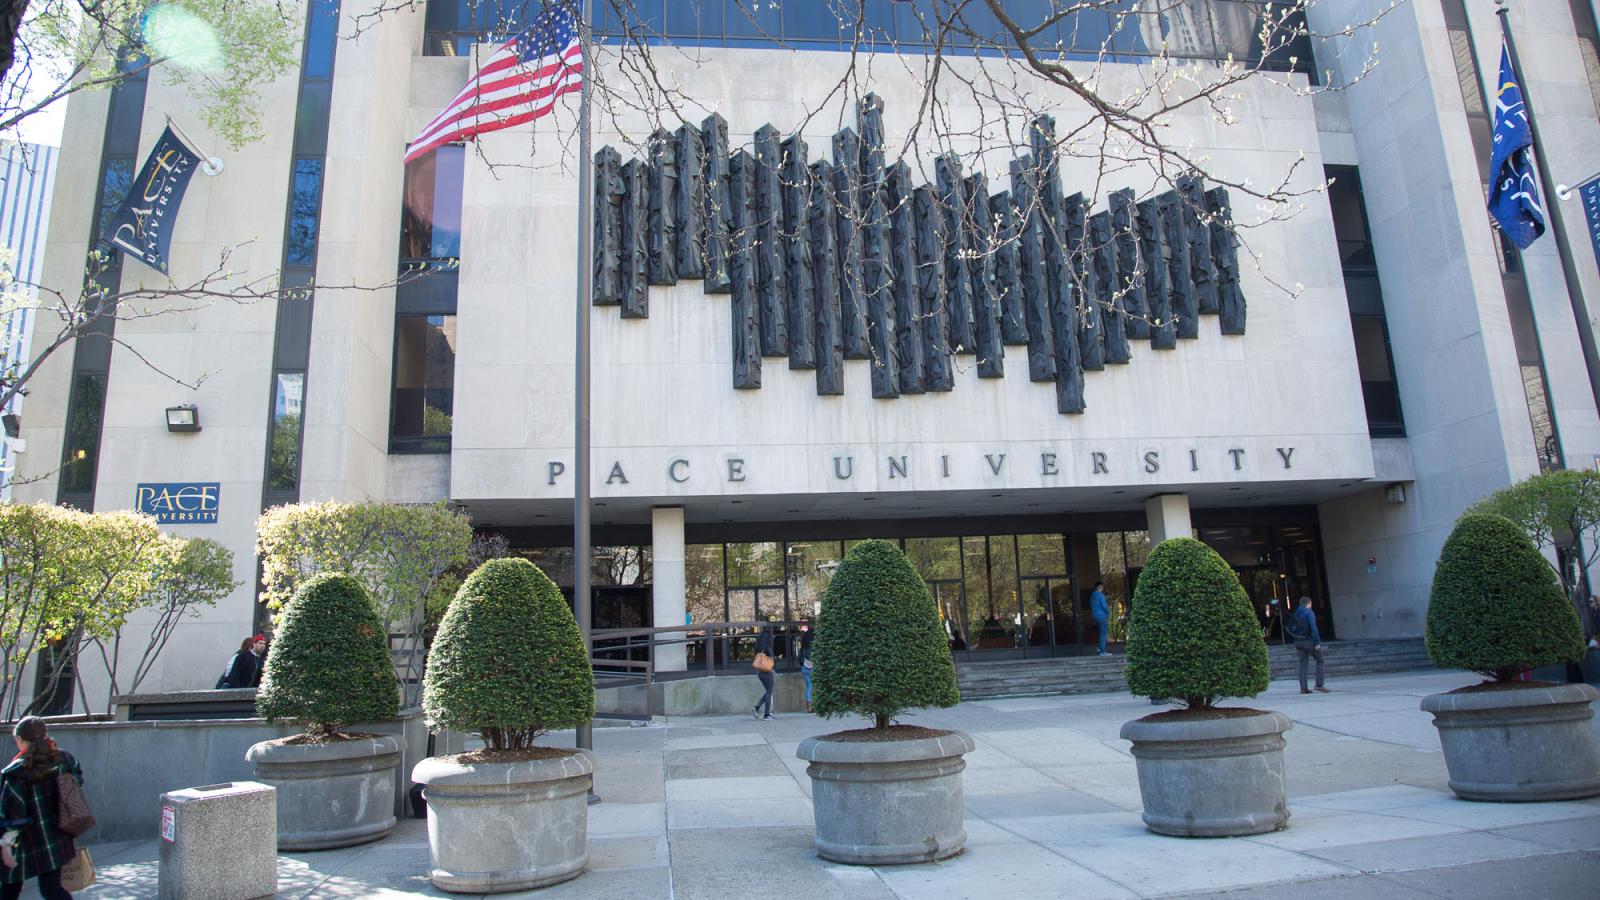 One Pace Plaza building on the New York City Campus of Pace University in Lower Manhattan